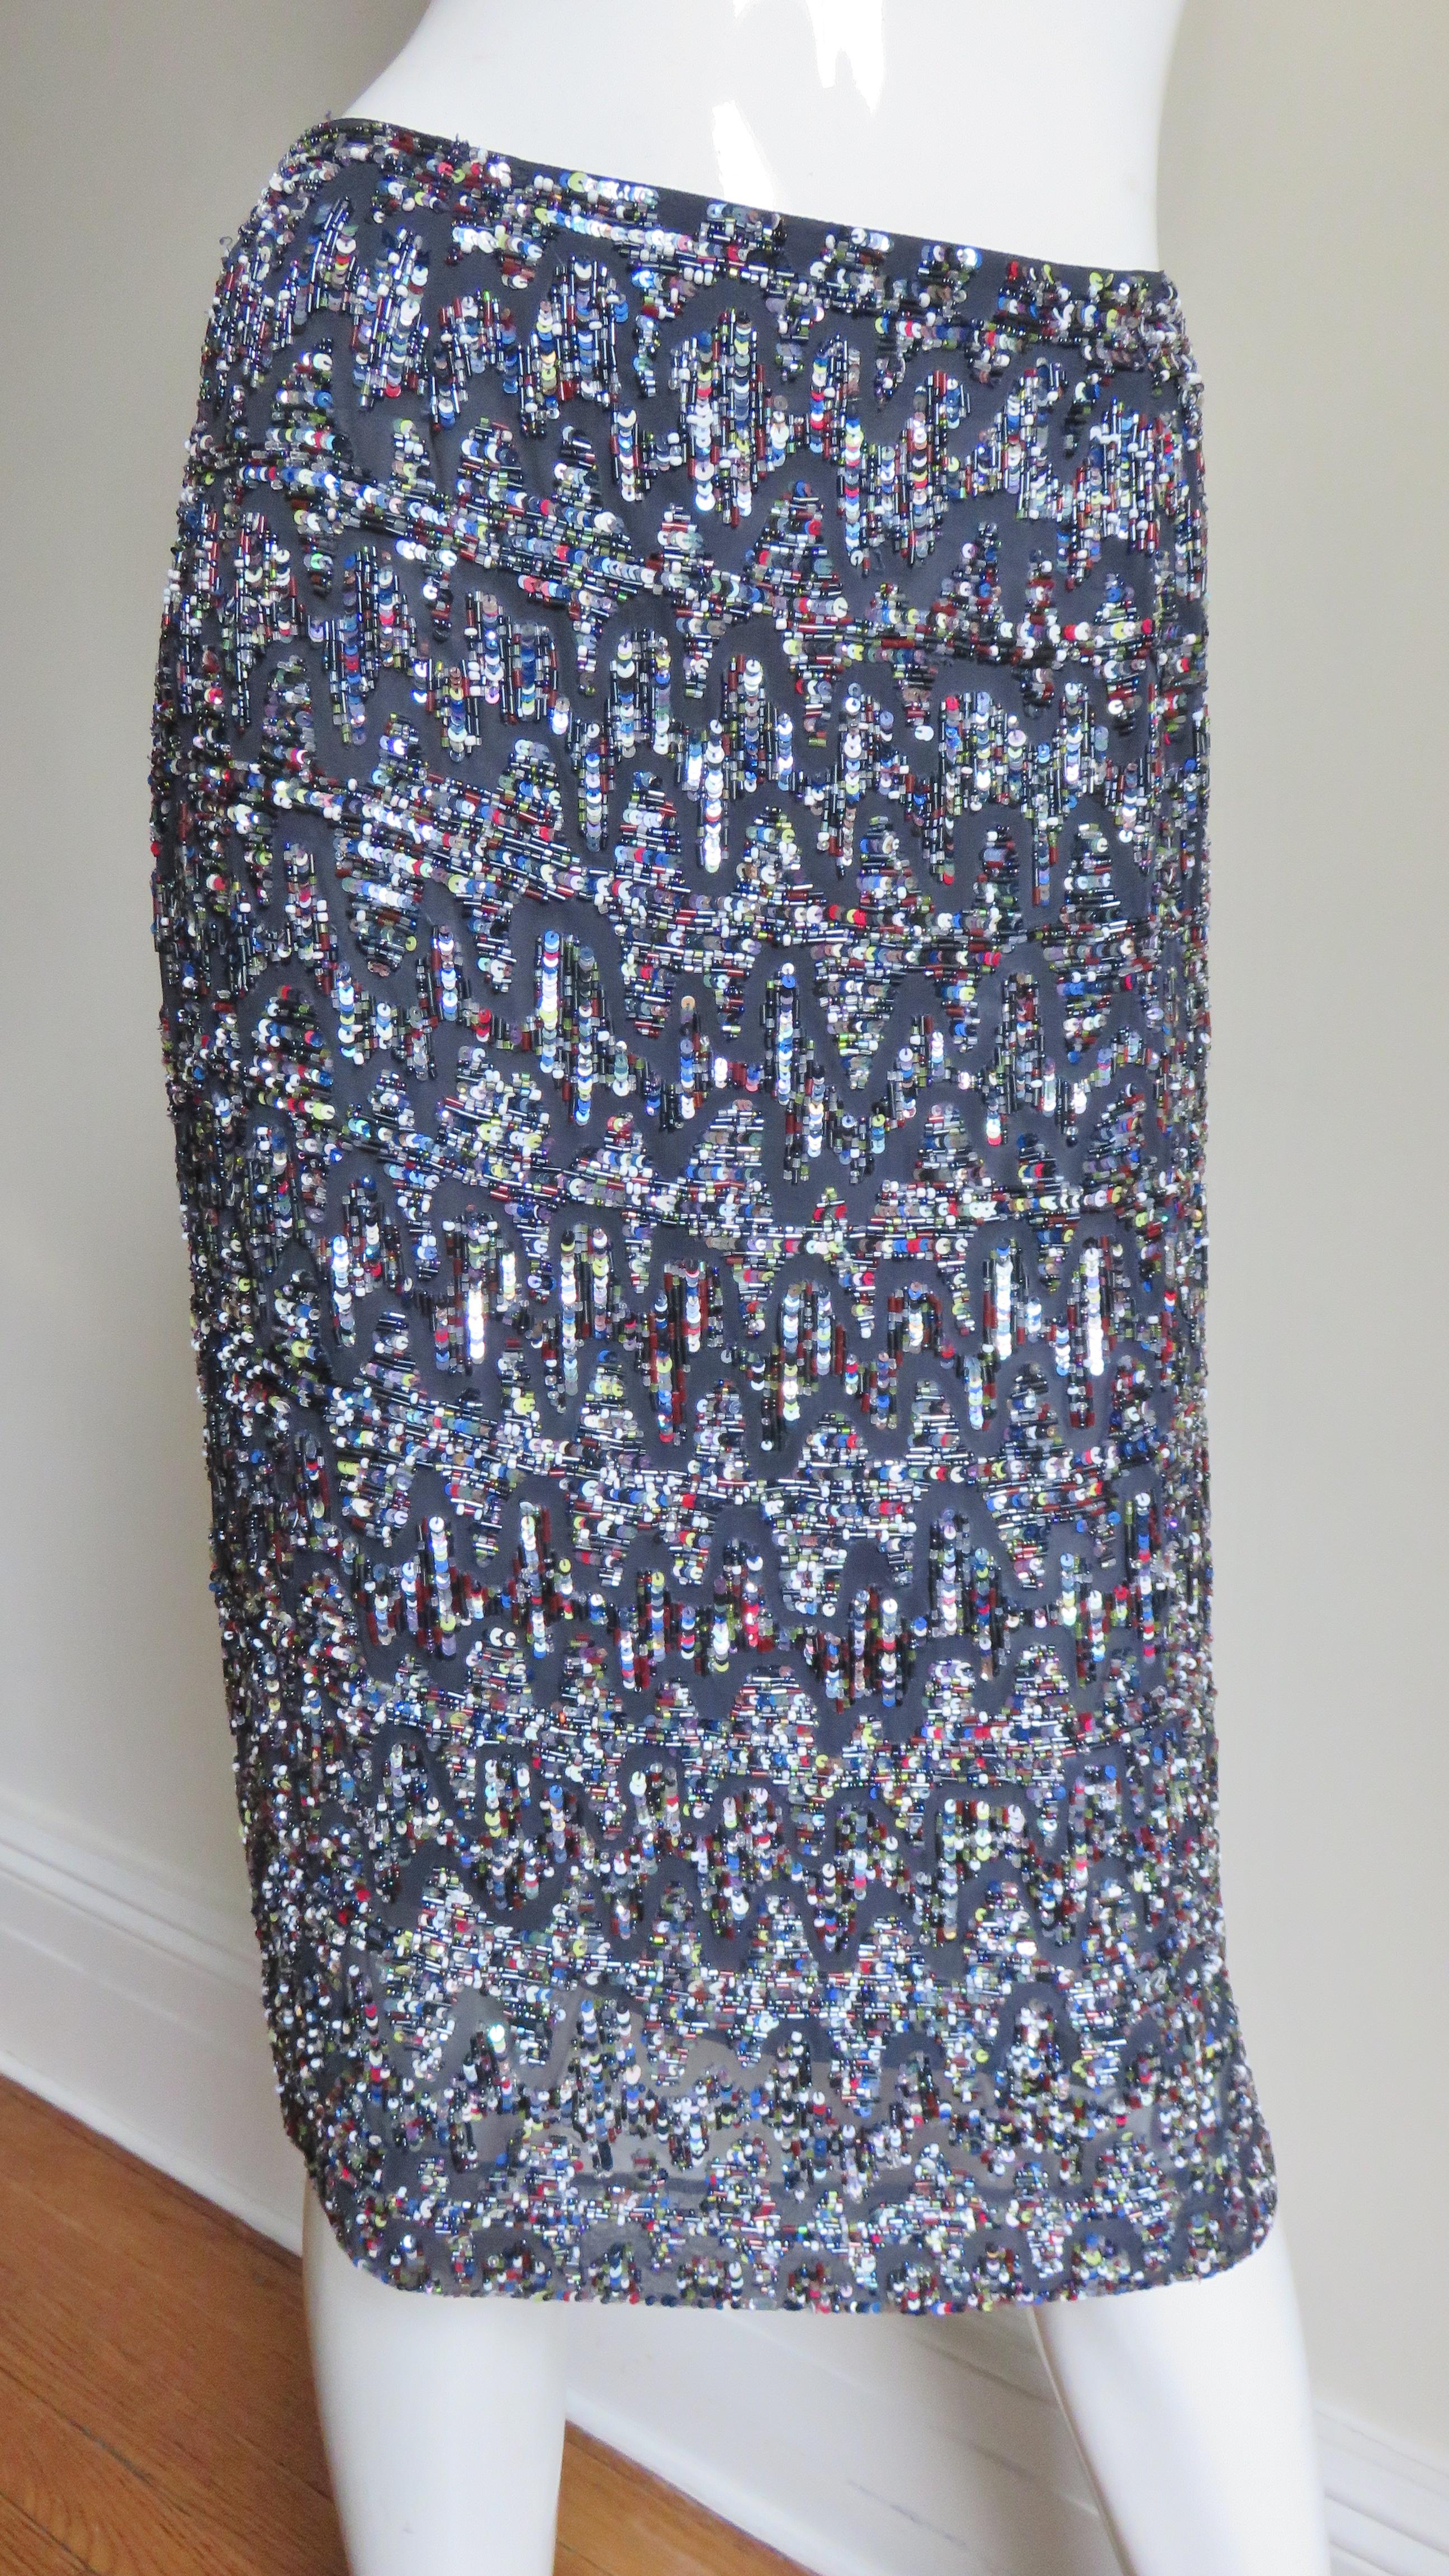 A gorgeous charcoal silk pencil skirt from Rena Lange covered in an elaborate pattern of white, silver, grey and red sequins, seed beads and glass tubular beads.  It is lined in the same charcoal silk and has a matching side zipper.
Fits sizes